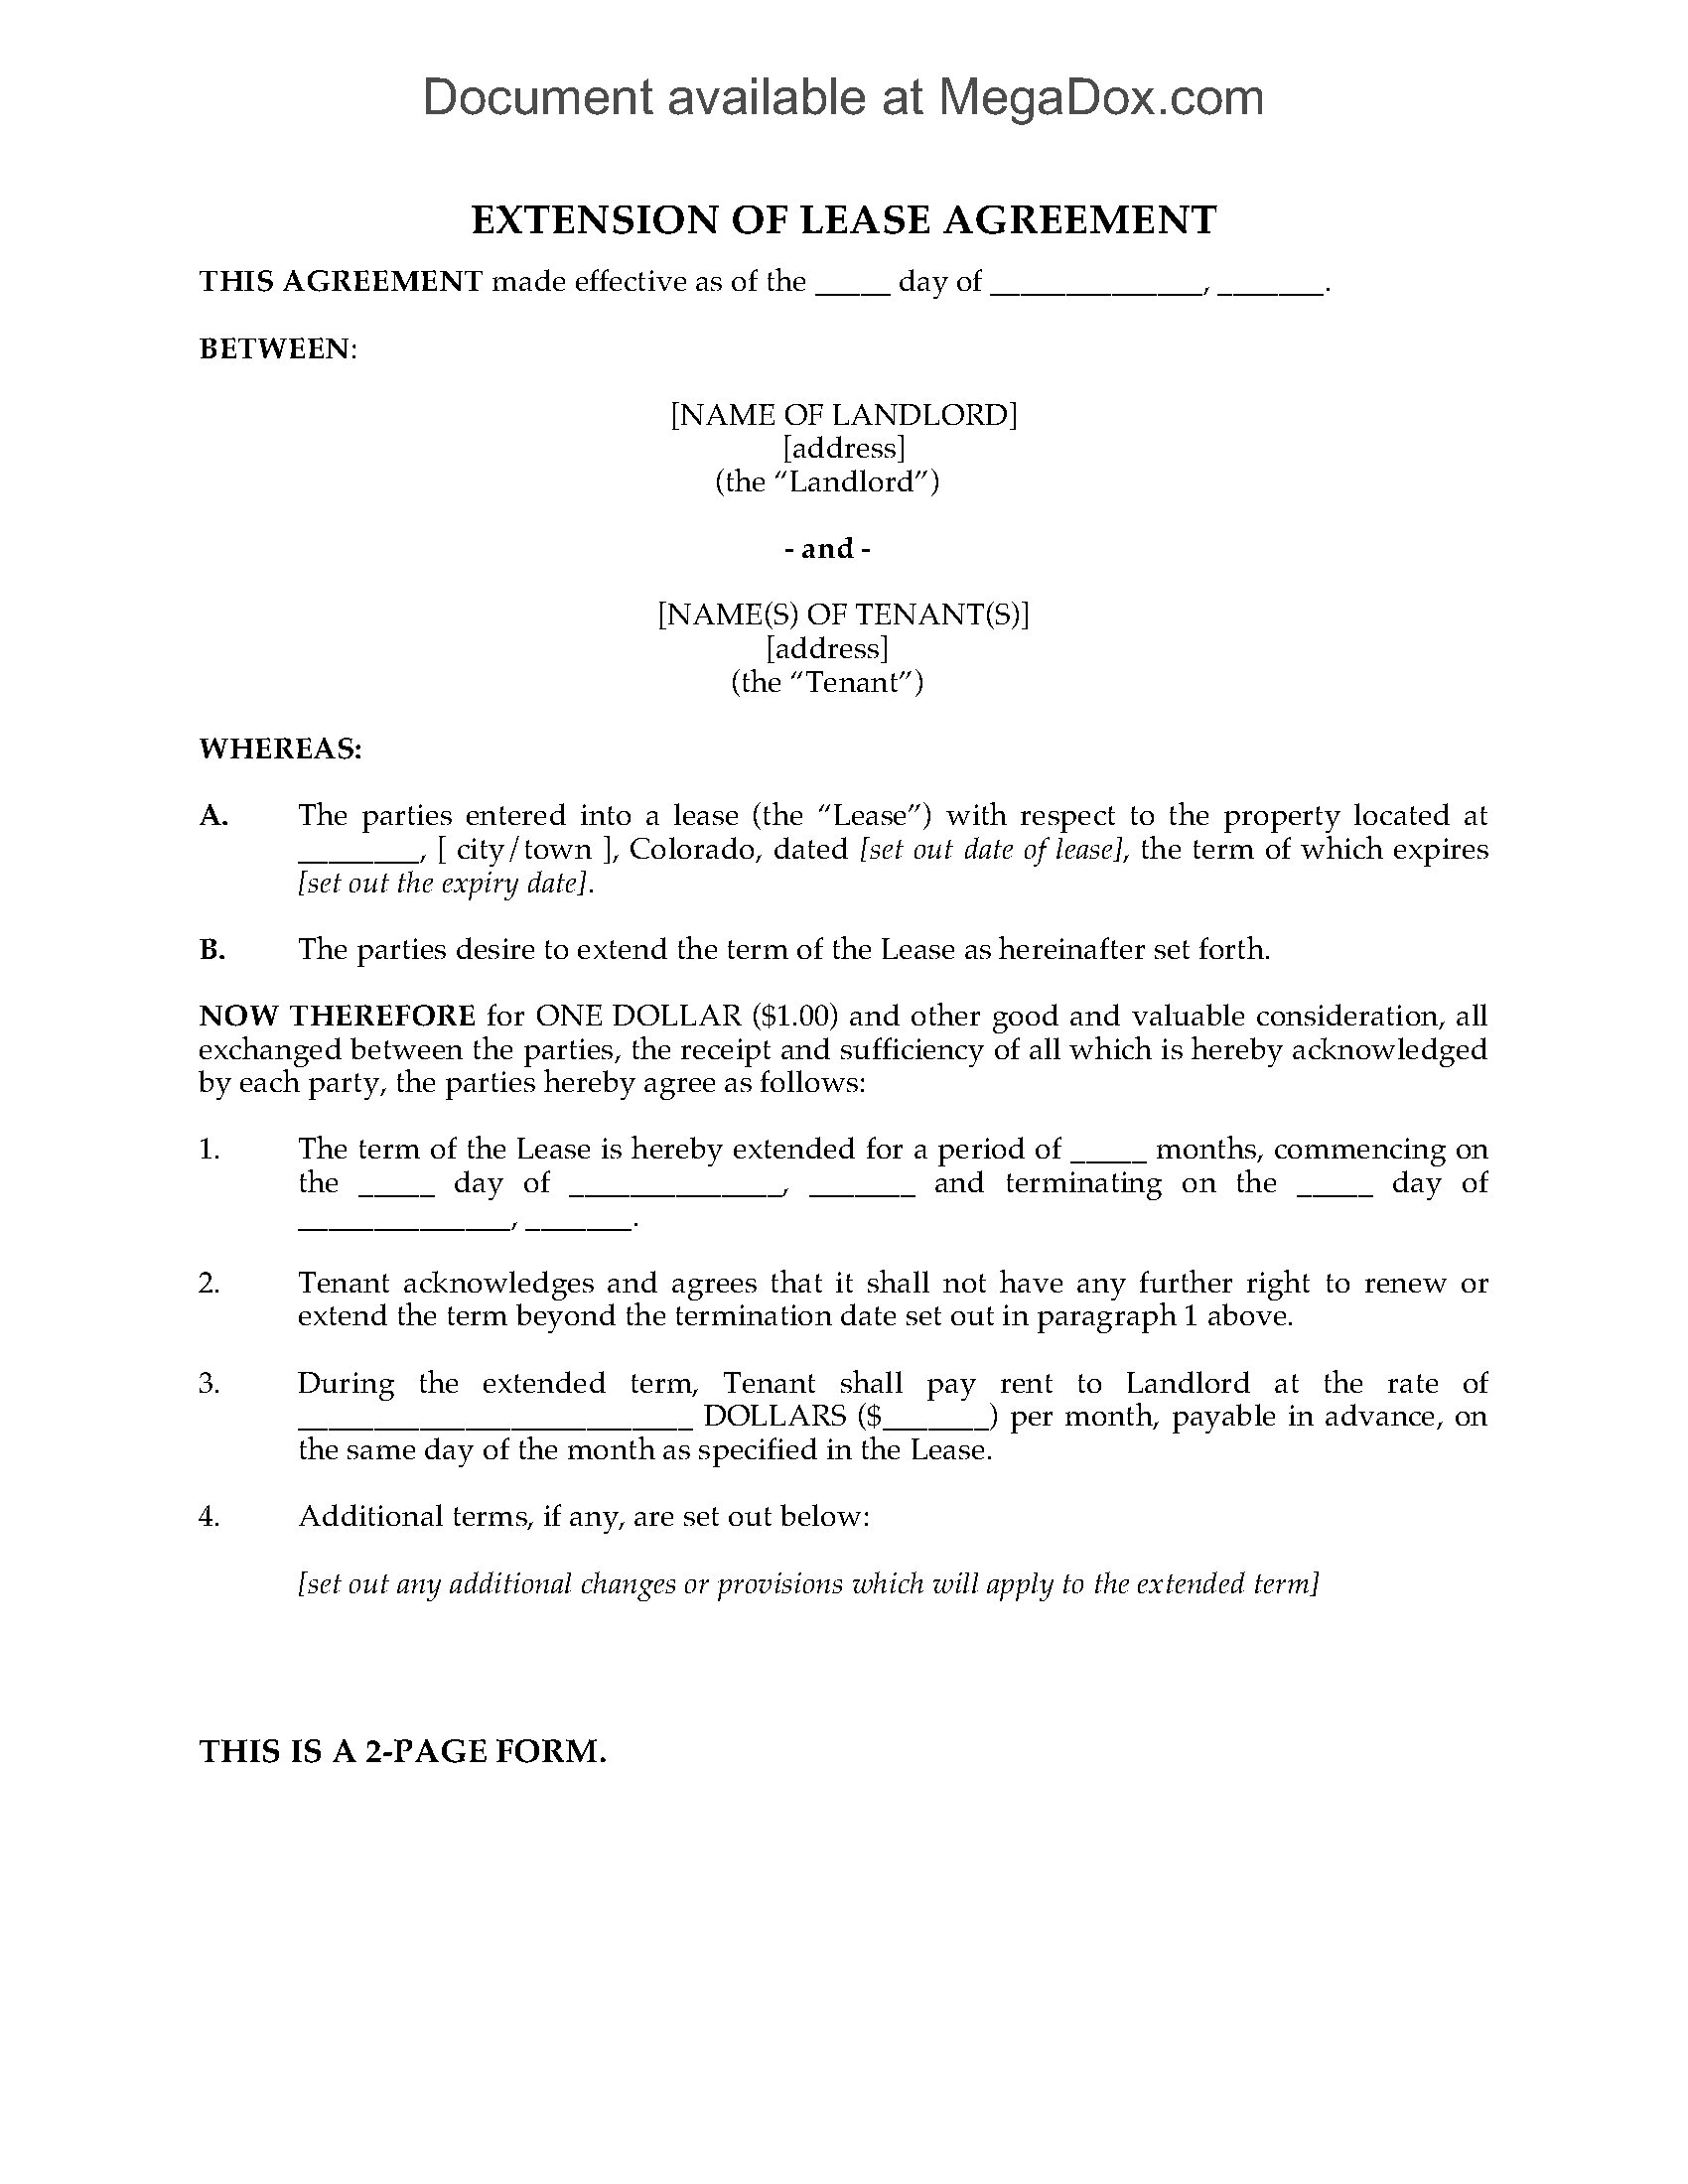 Colorado Residential Lease Agreement Colorado Extension Of Residential Lease